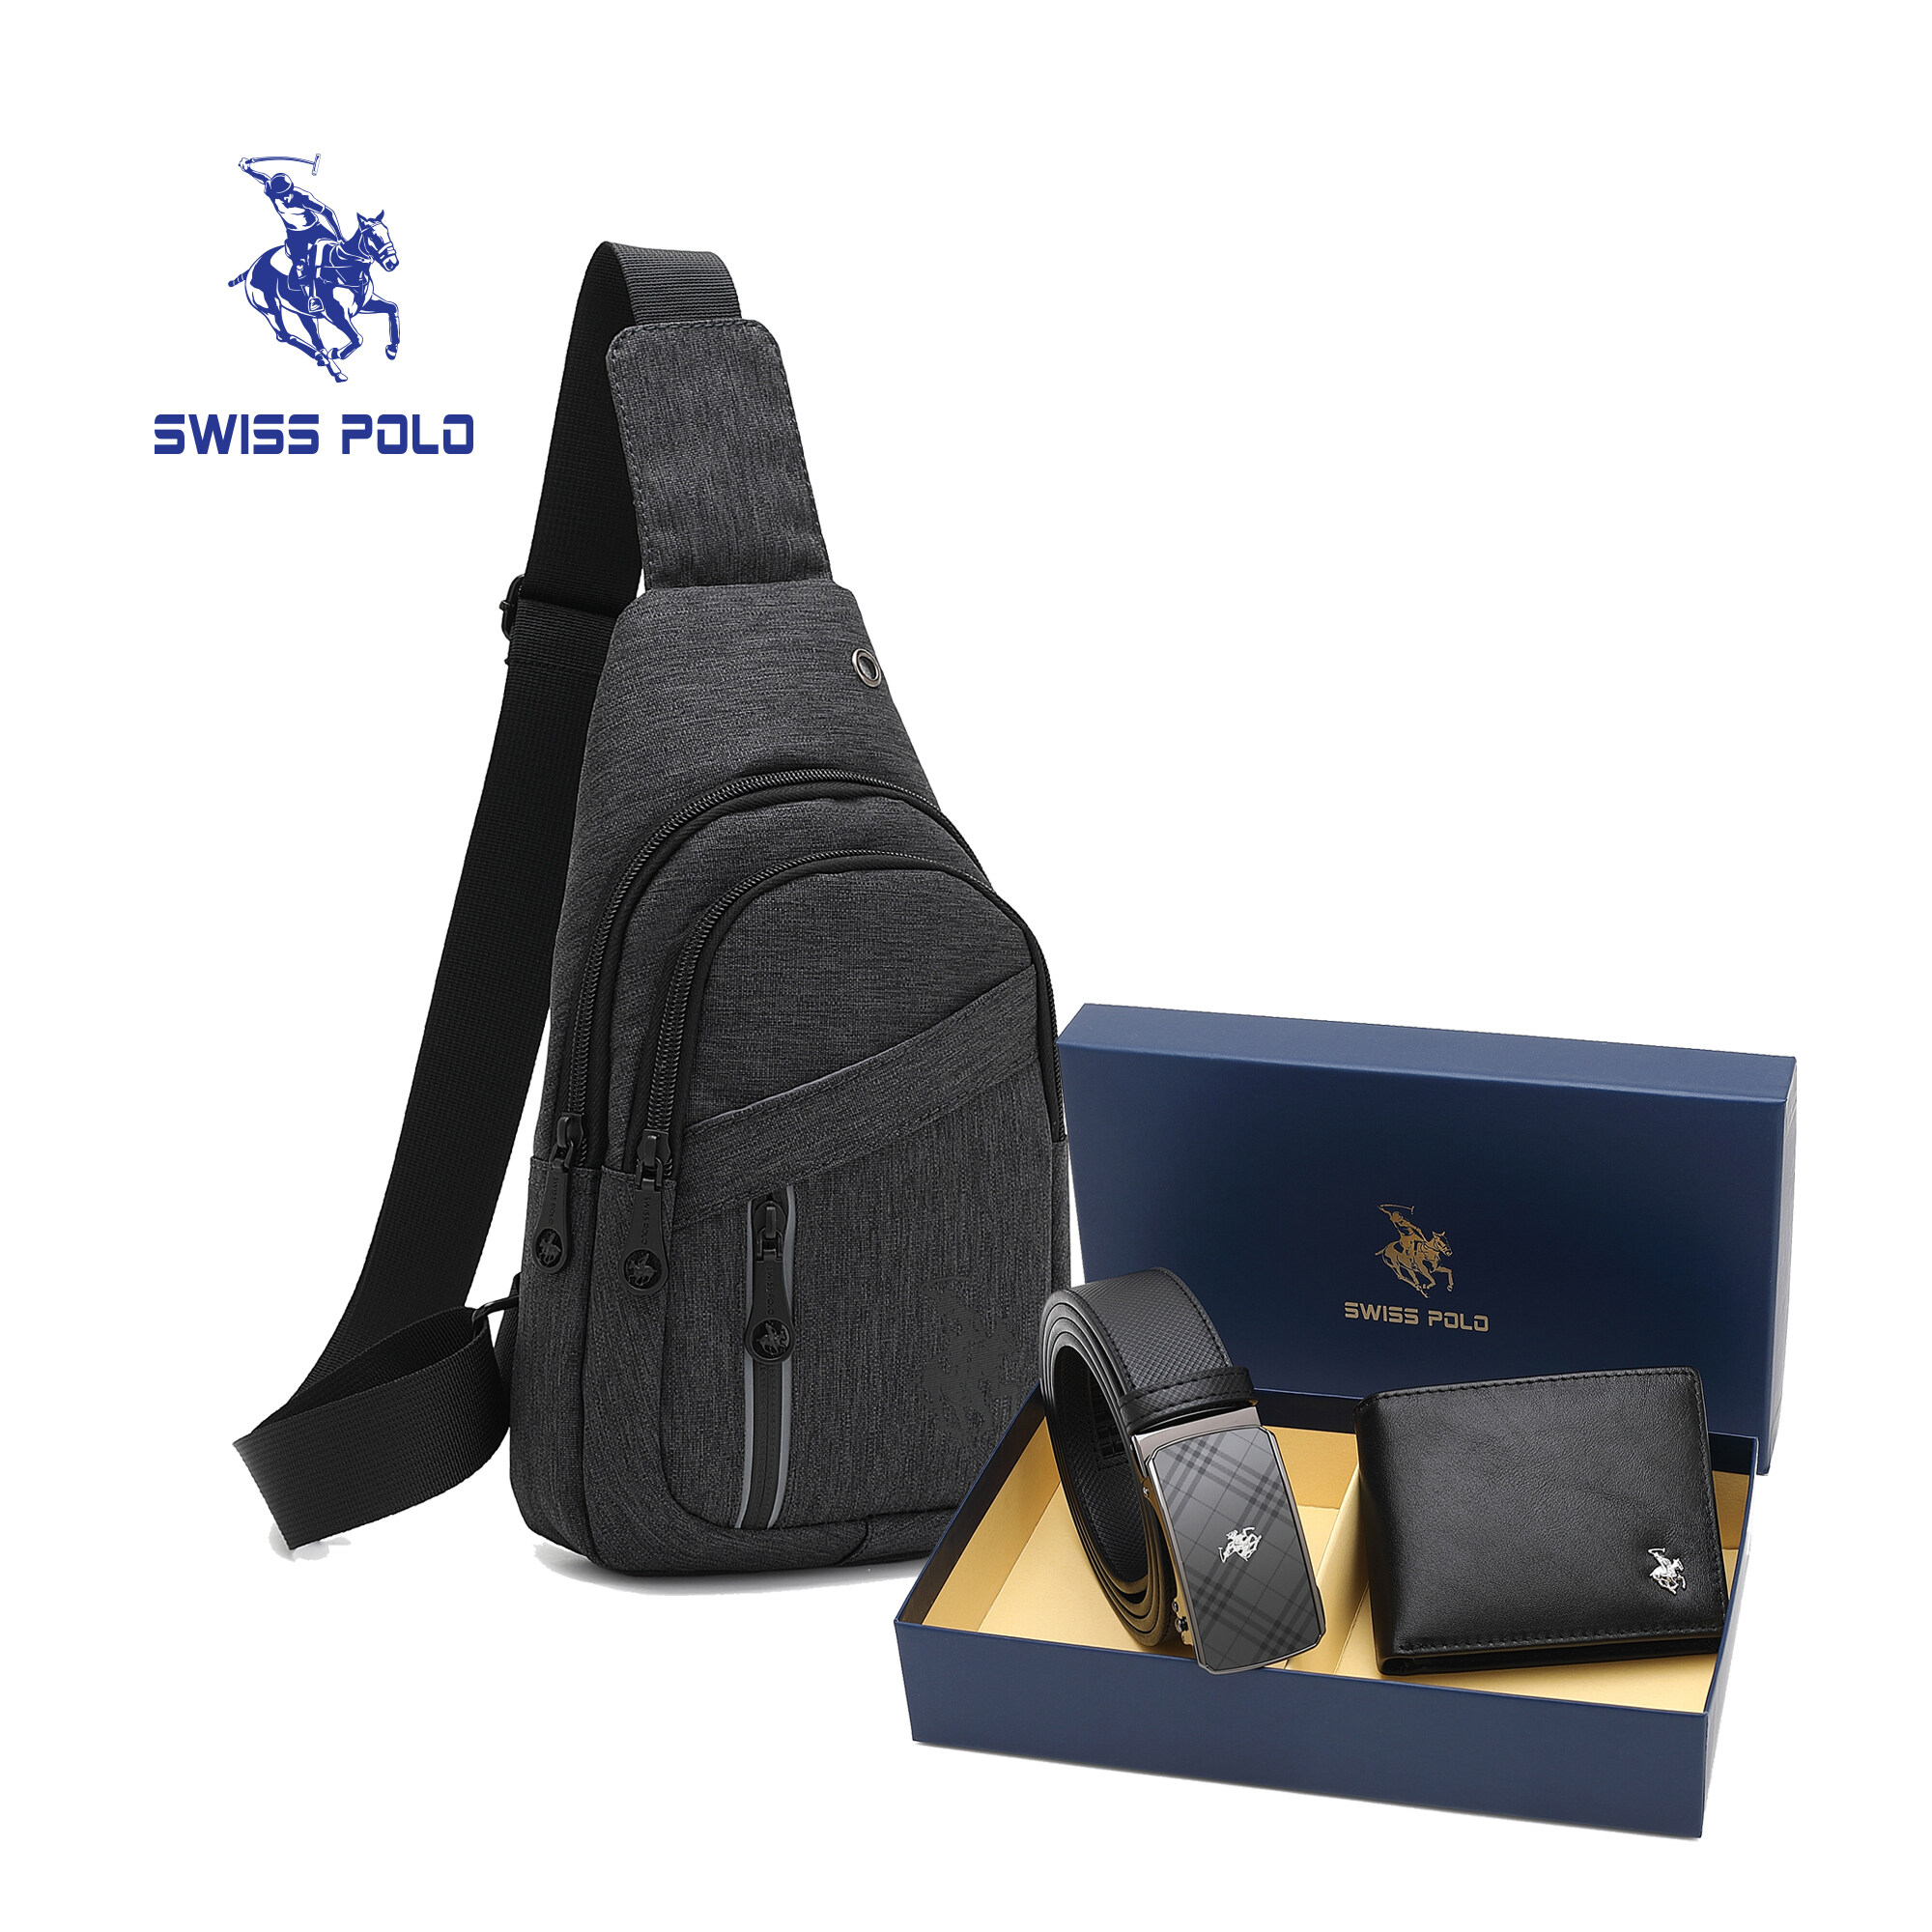 SWISS POLO Gift Set/ Box Wallet With Belt SGS 568-7 BLUE/GREY